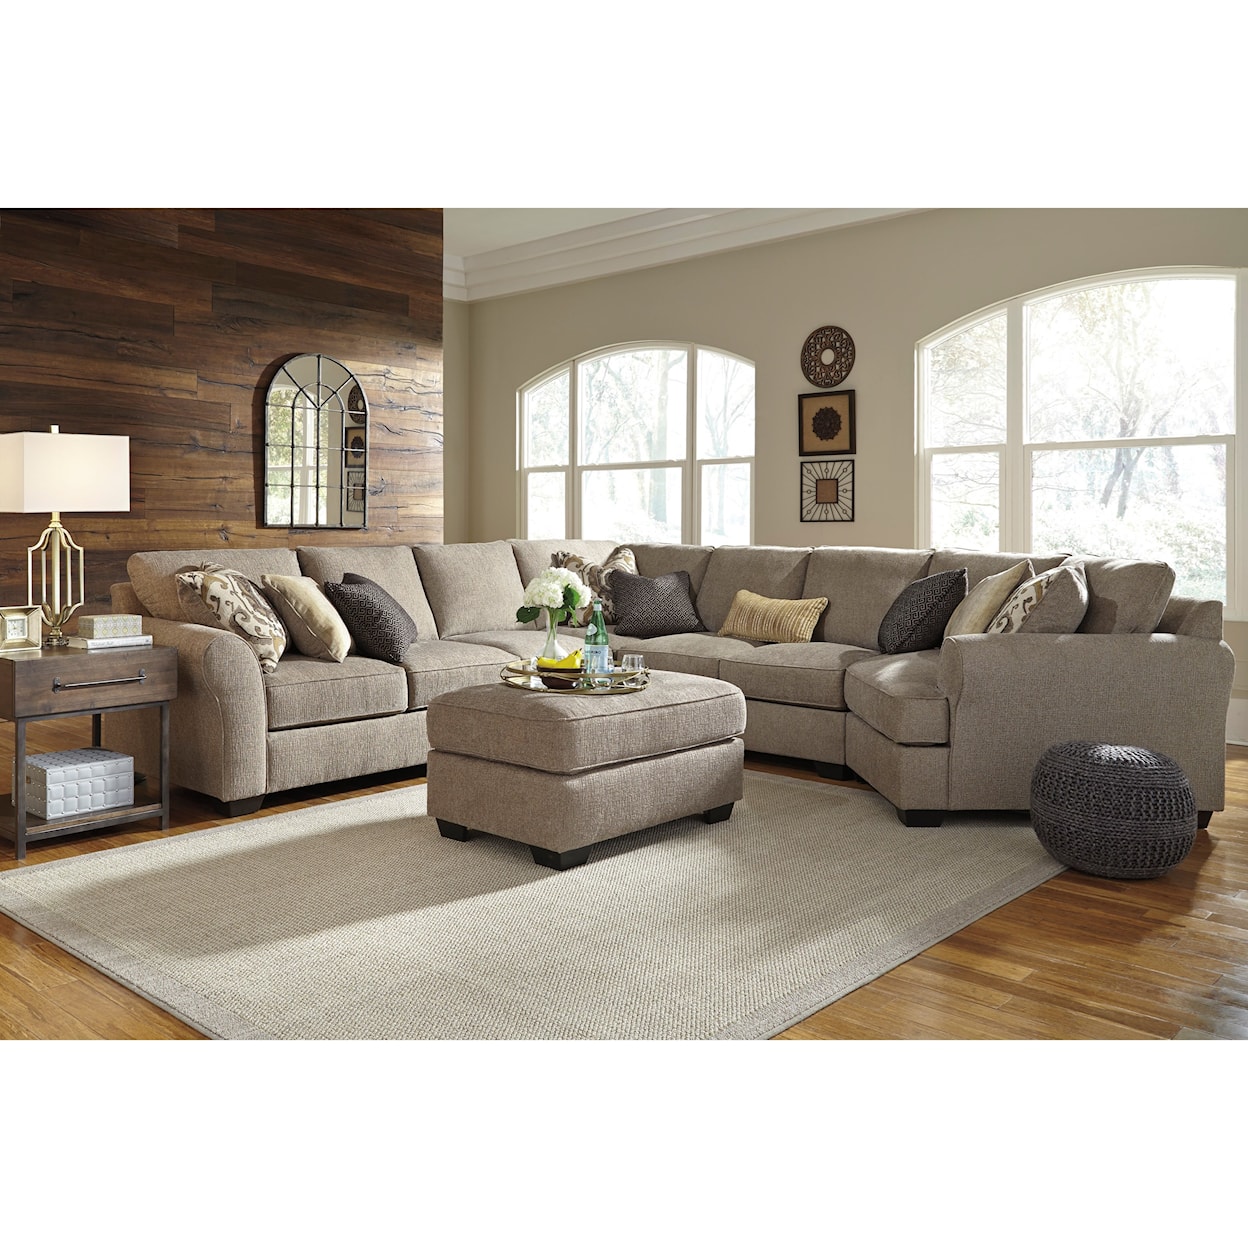 Benchcraft Pantomine 5-Piece Sectional with Ottoman